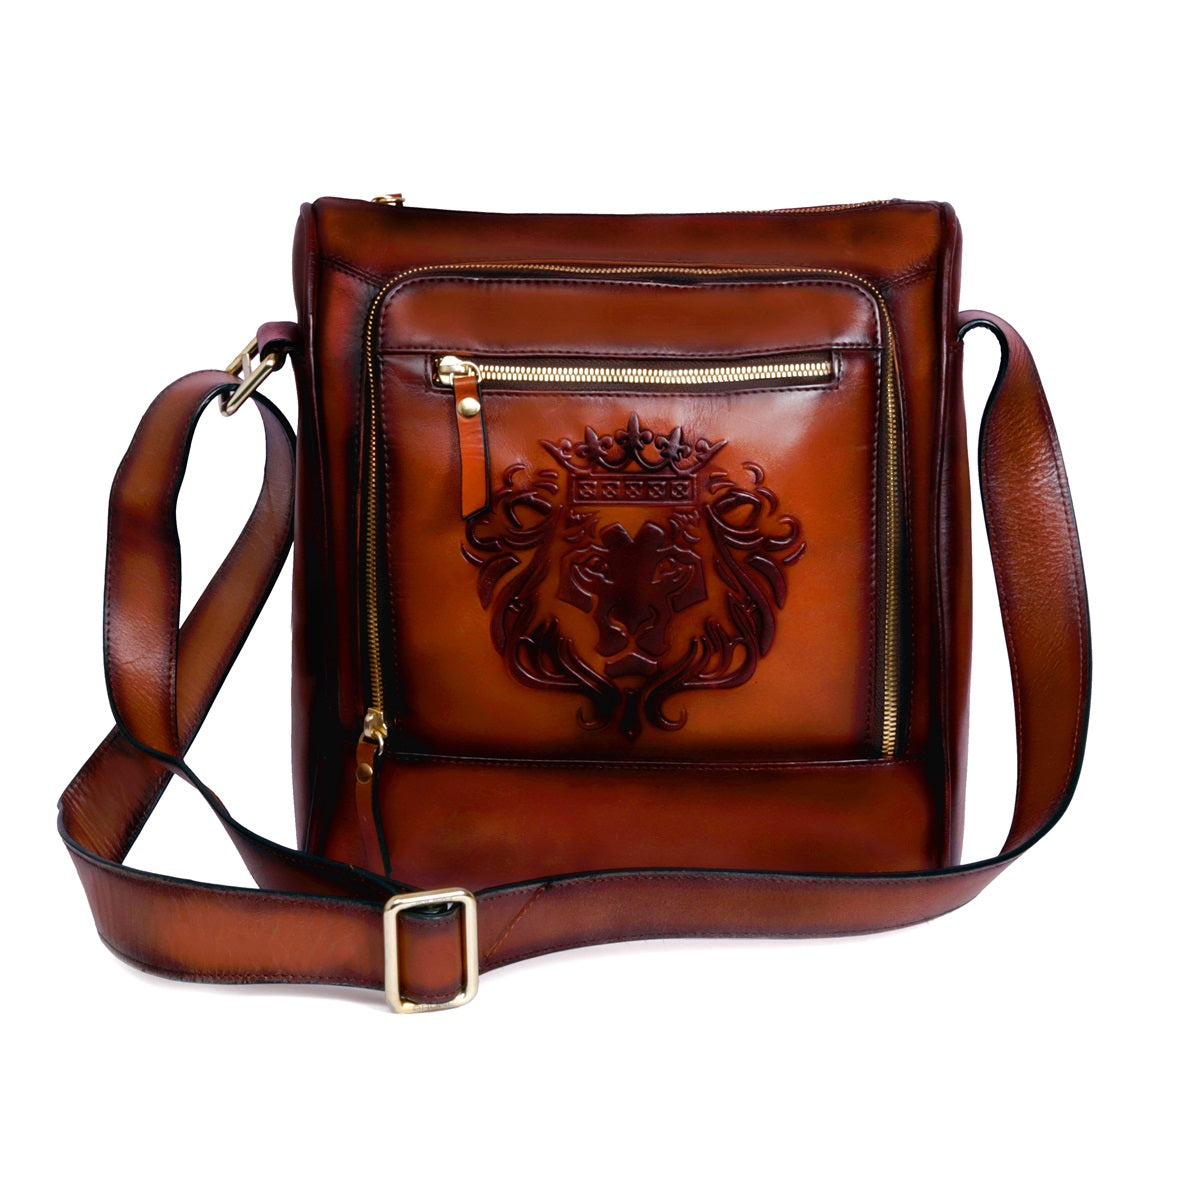 Fanny Pack Bag In Tan Leather with Embossed Lion